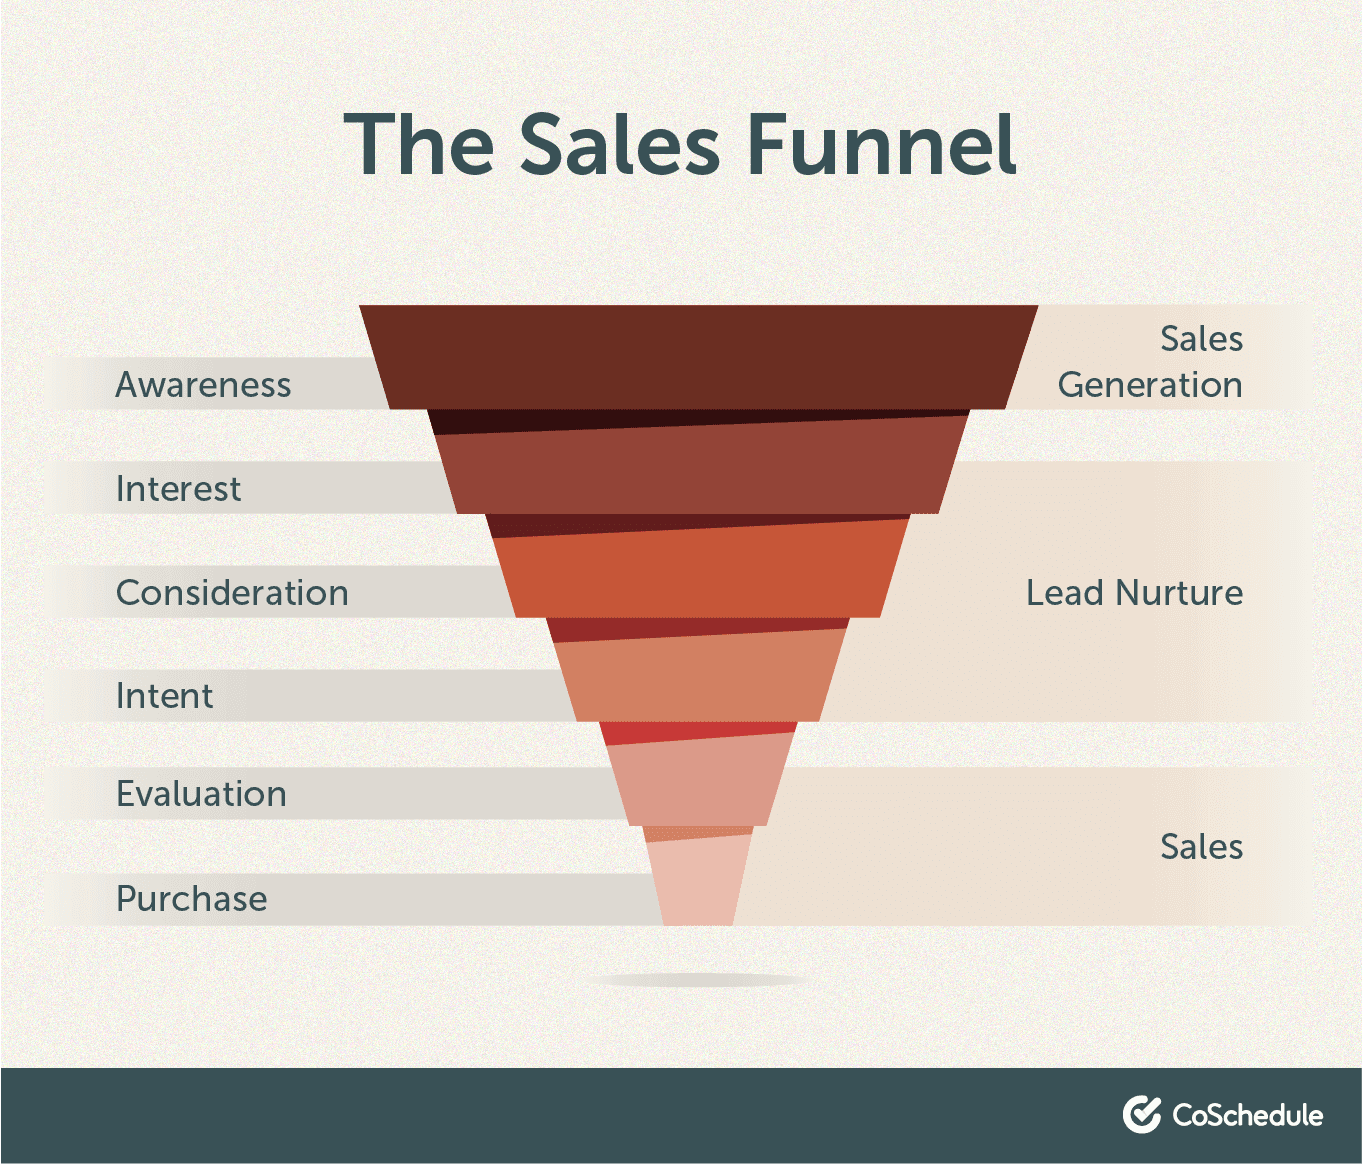 Elements to the sales funnel